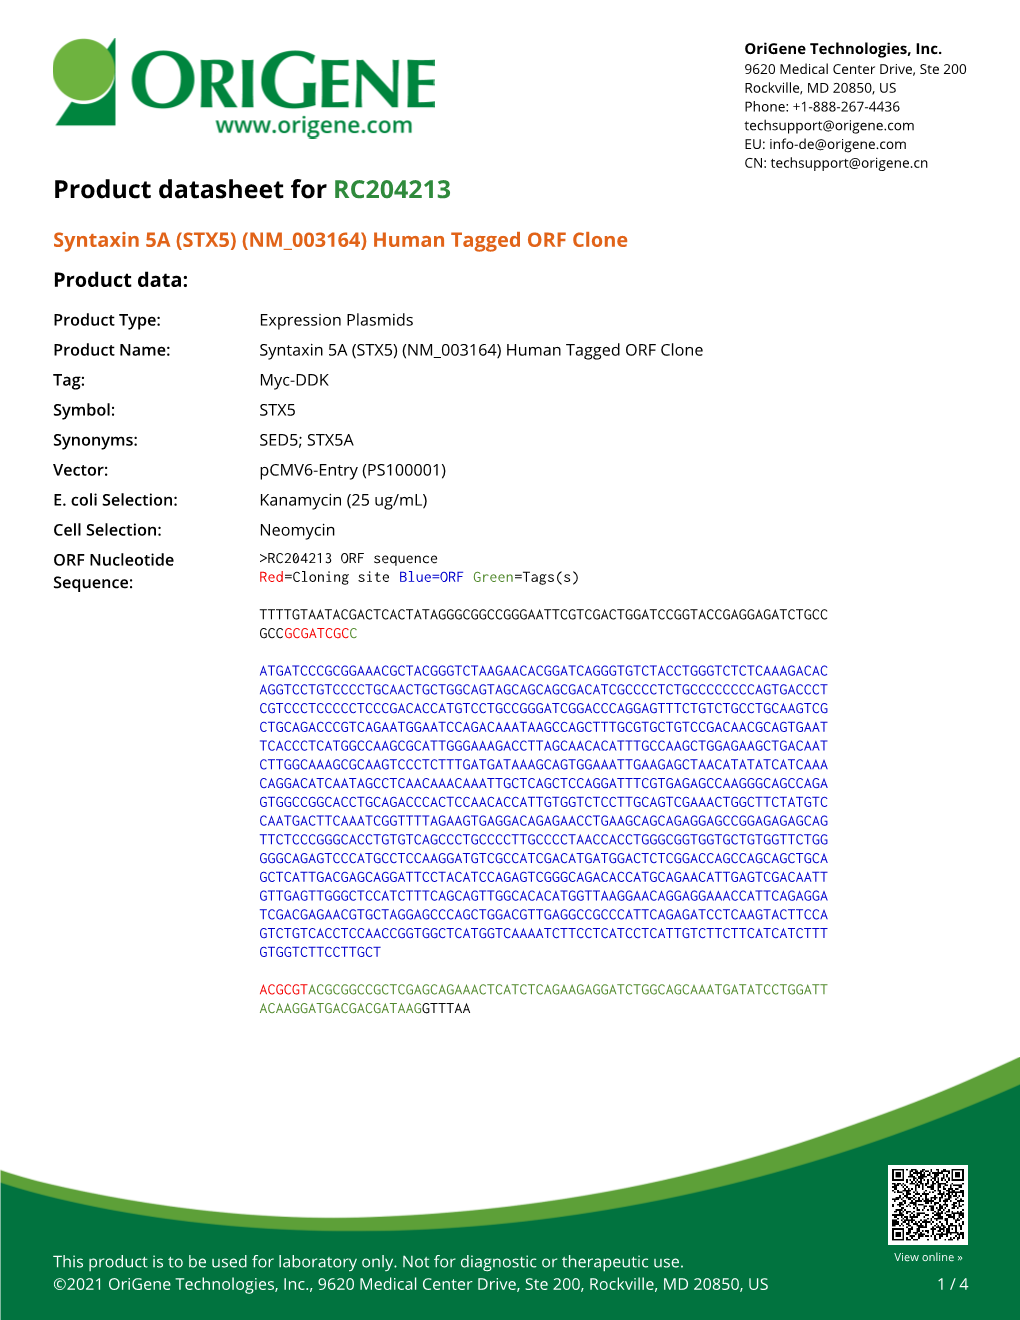 Syntaxin 5A (STX5) (NM 003164) Human Tagged ORF Clone Product Data